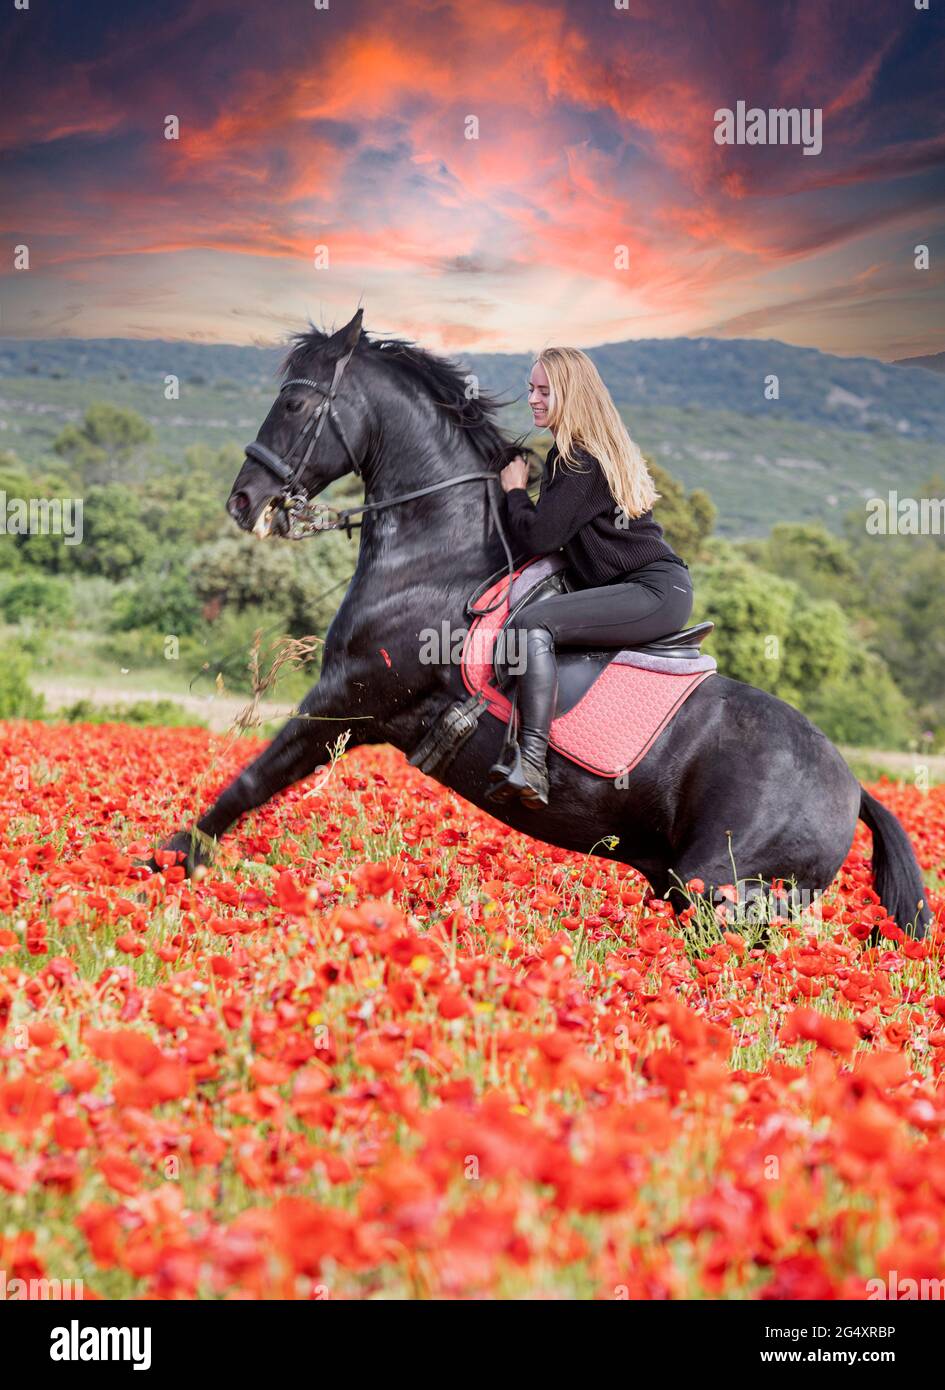 riding girl are training her black horse Stock Photo